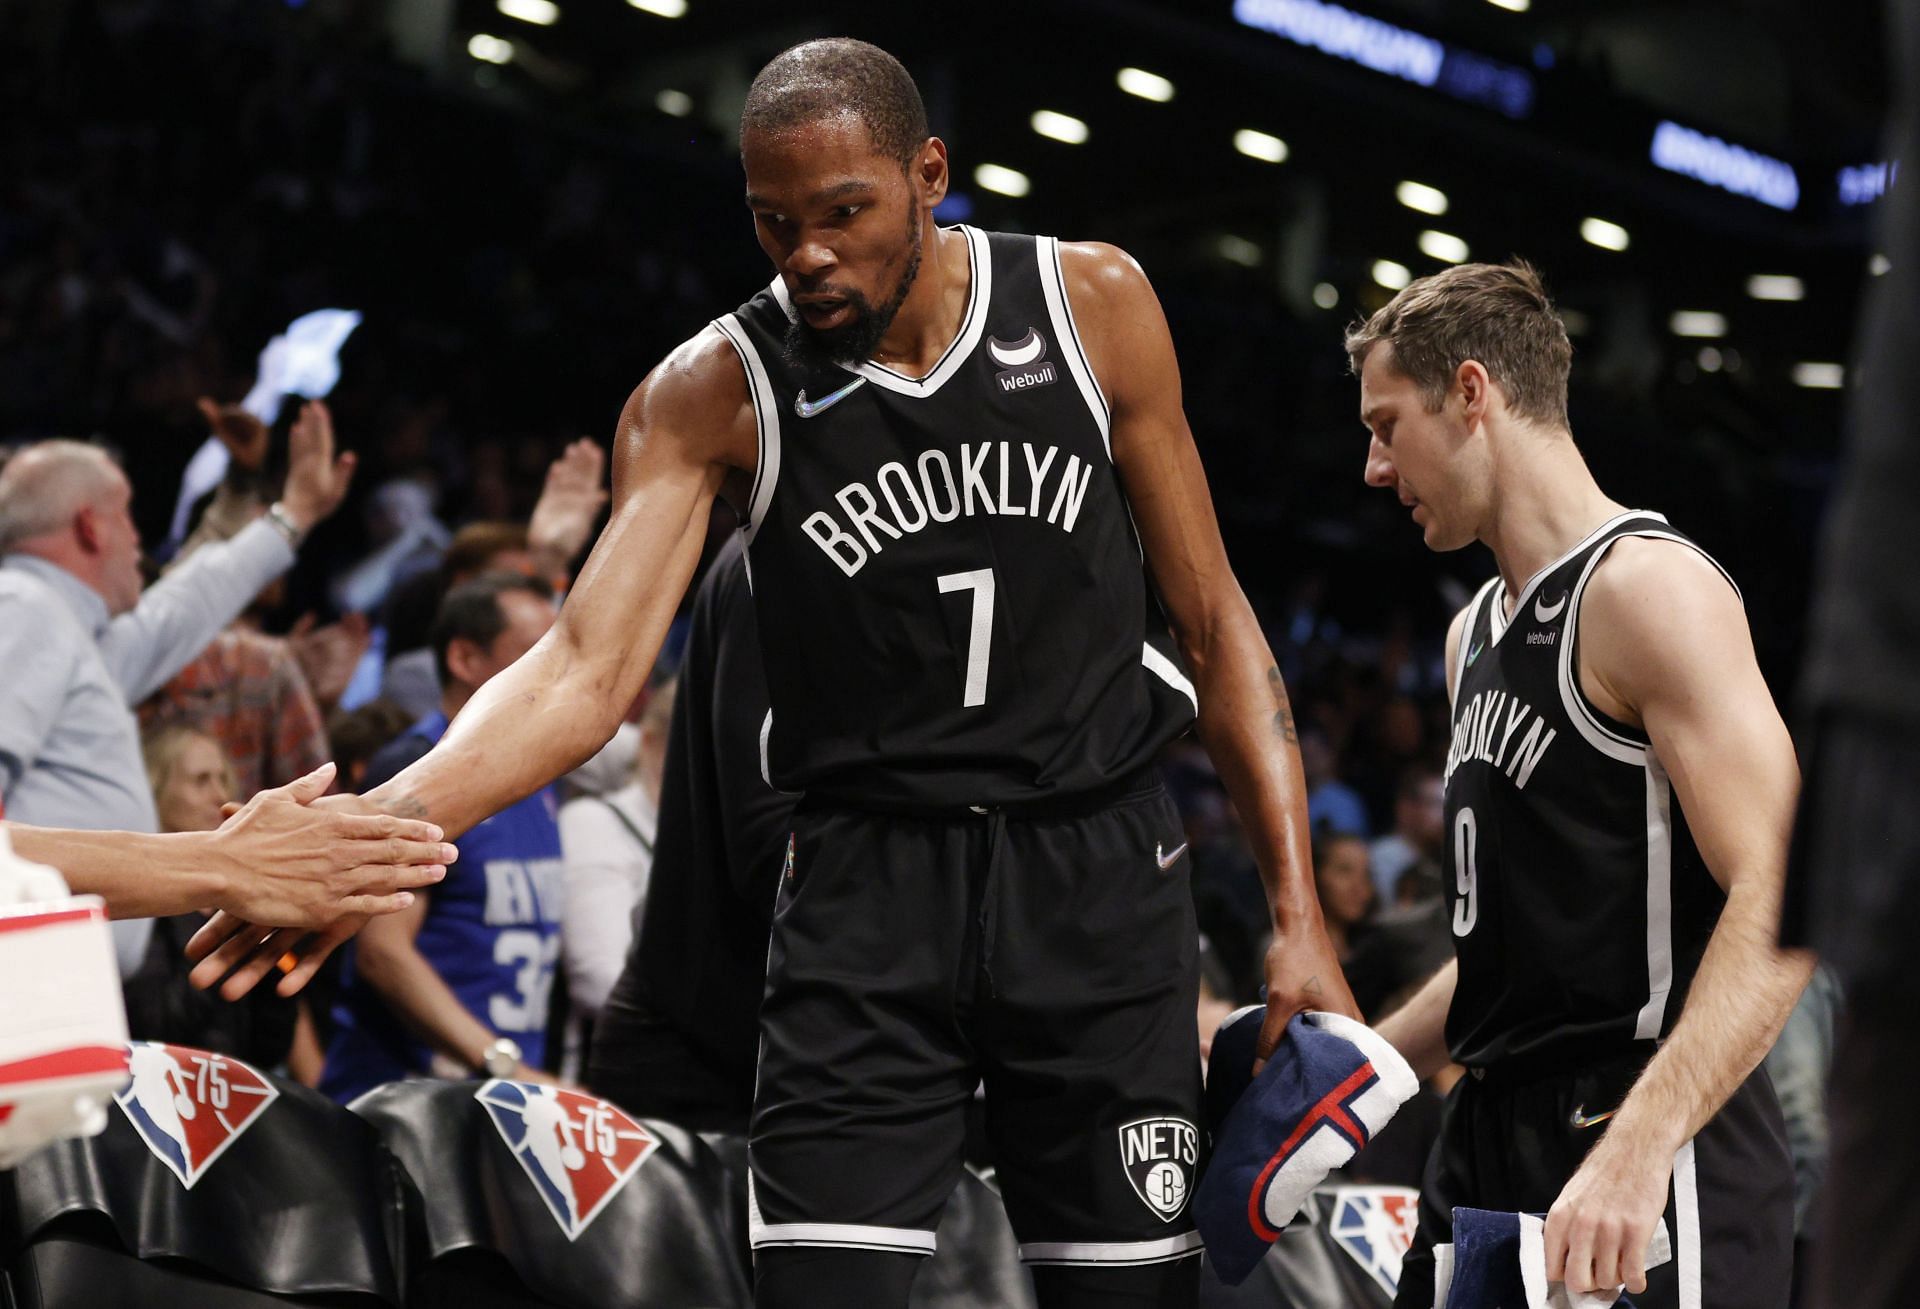 Kevin Durant scored 25 points and made 11 assists in the Brooklyn Nets&#039; - Play-In Tournament win over the Cavs